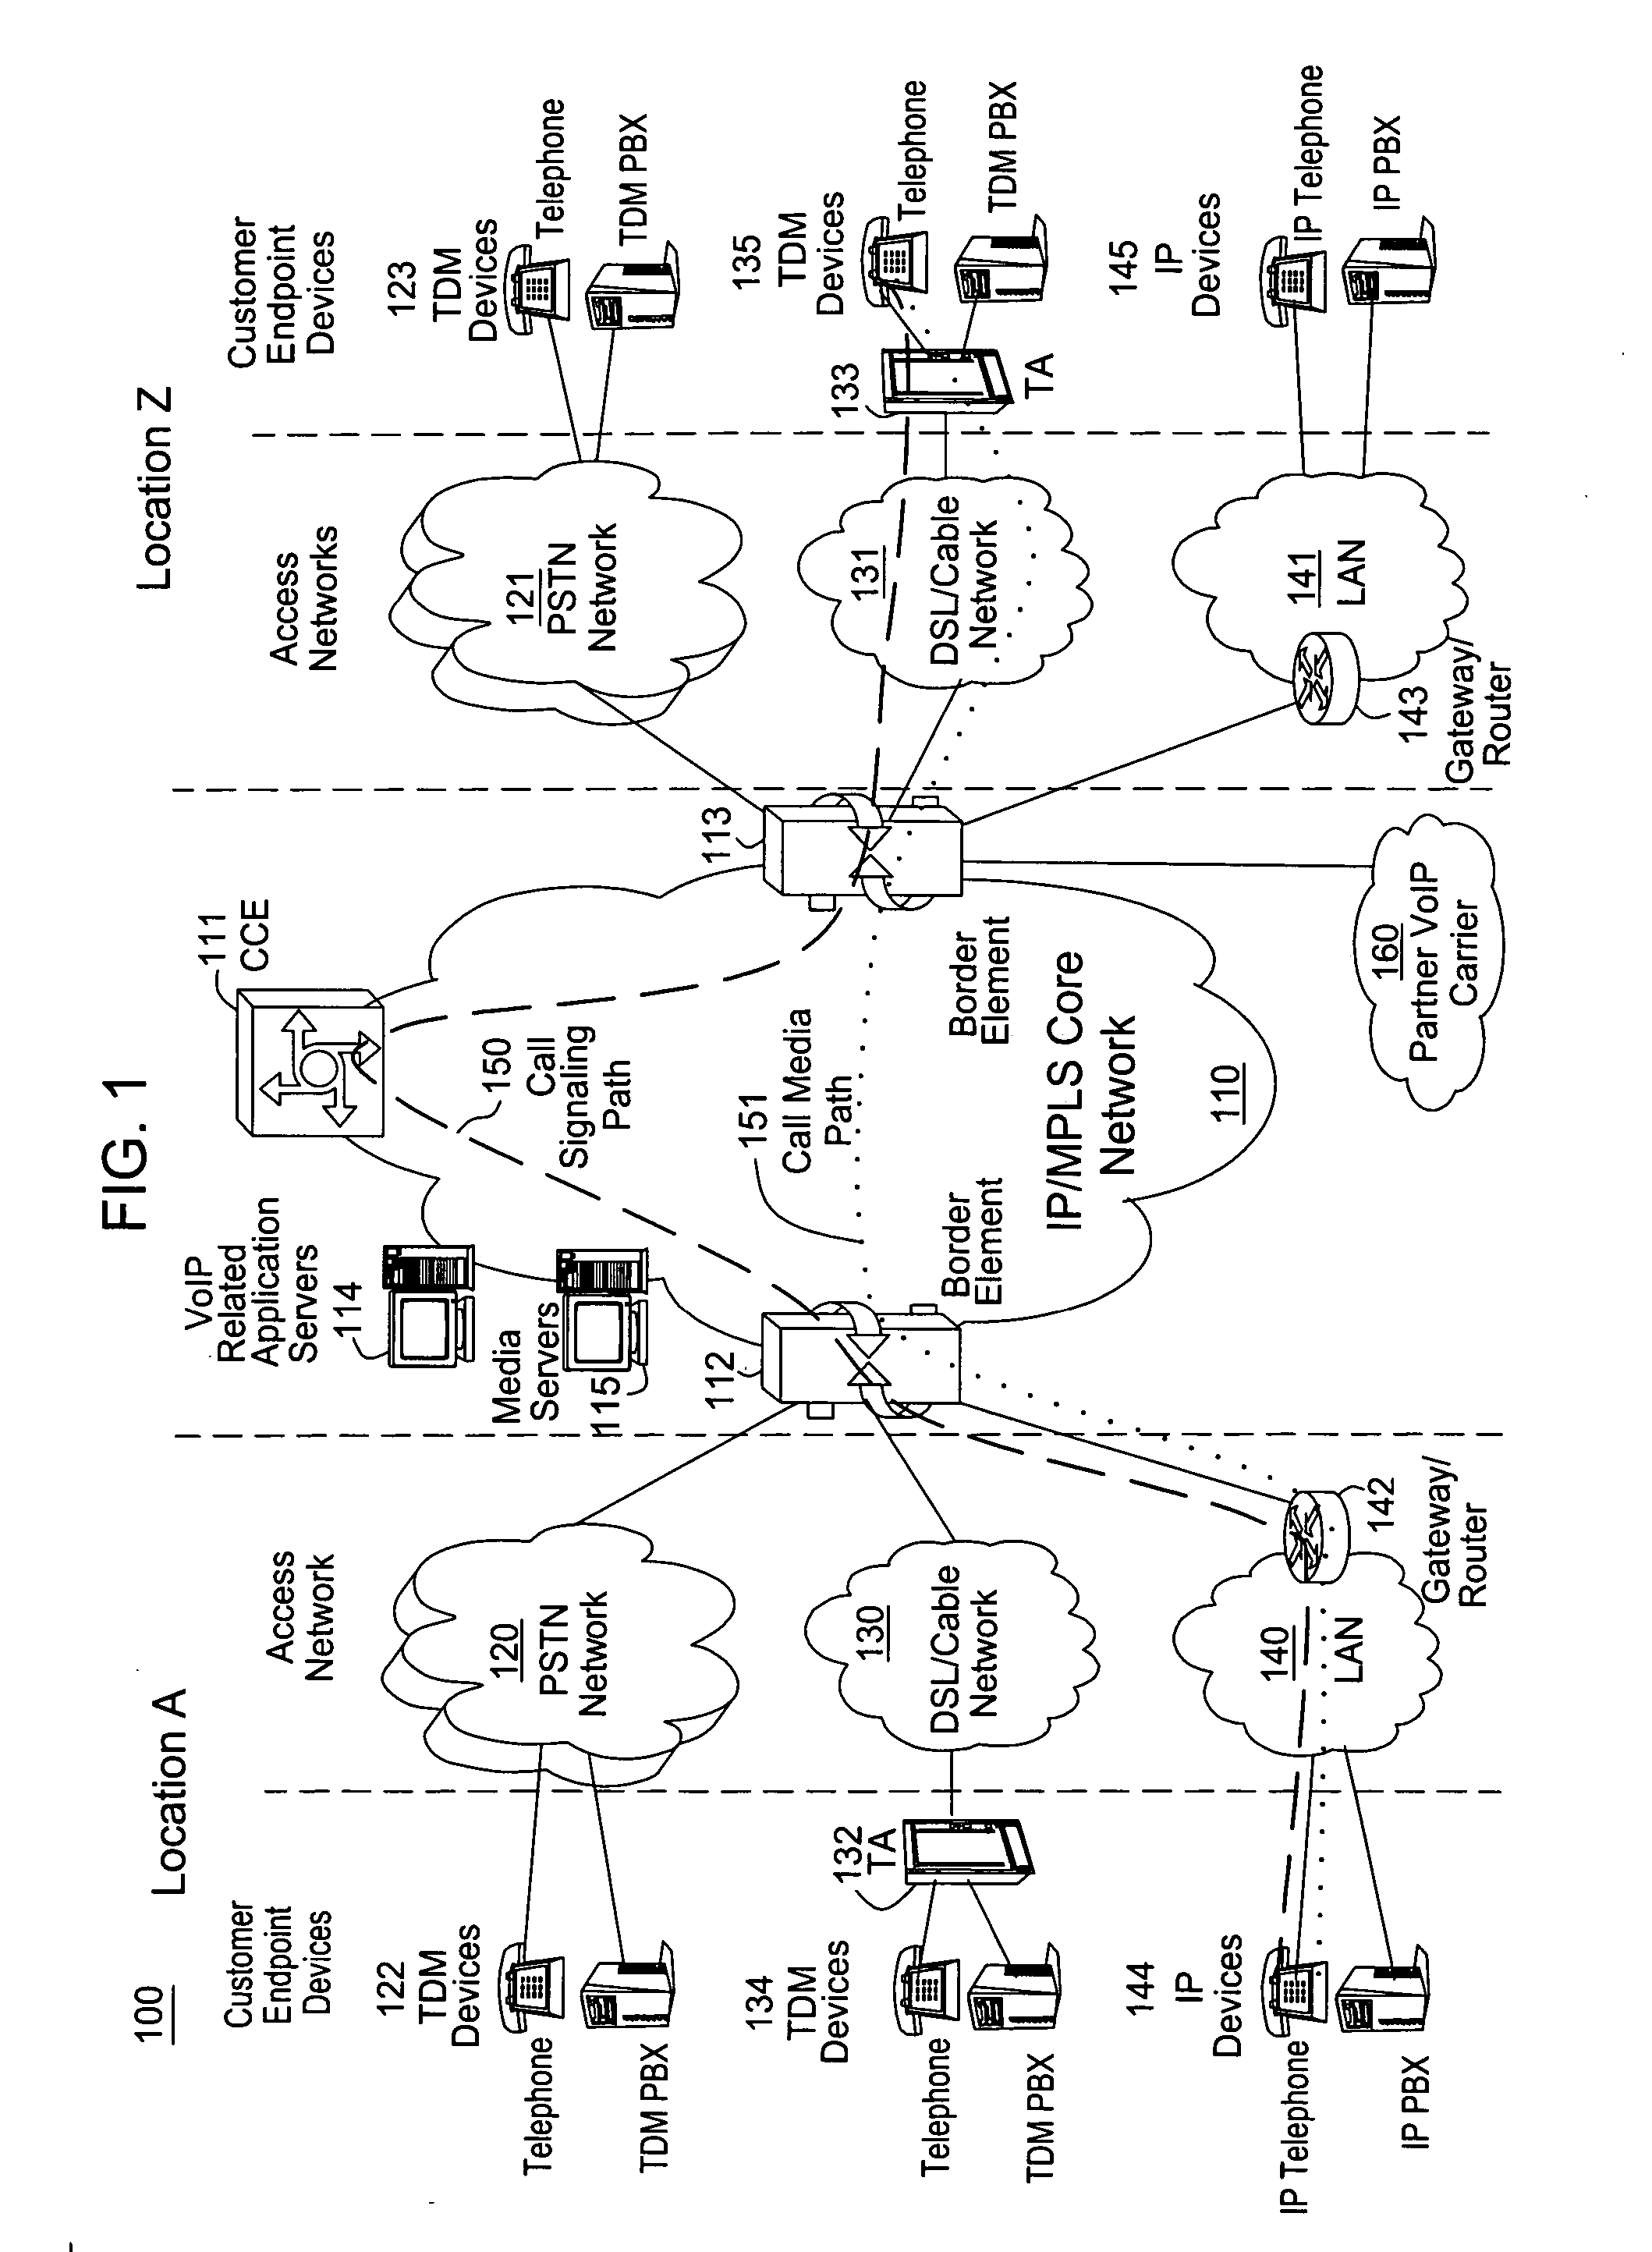 Method and apparatus for detecting subscriber service address change